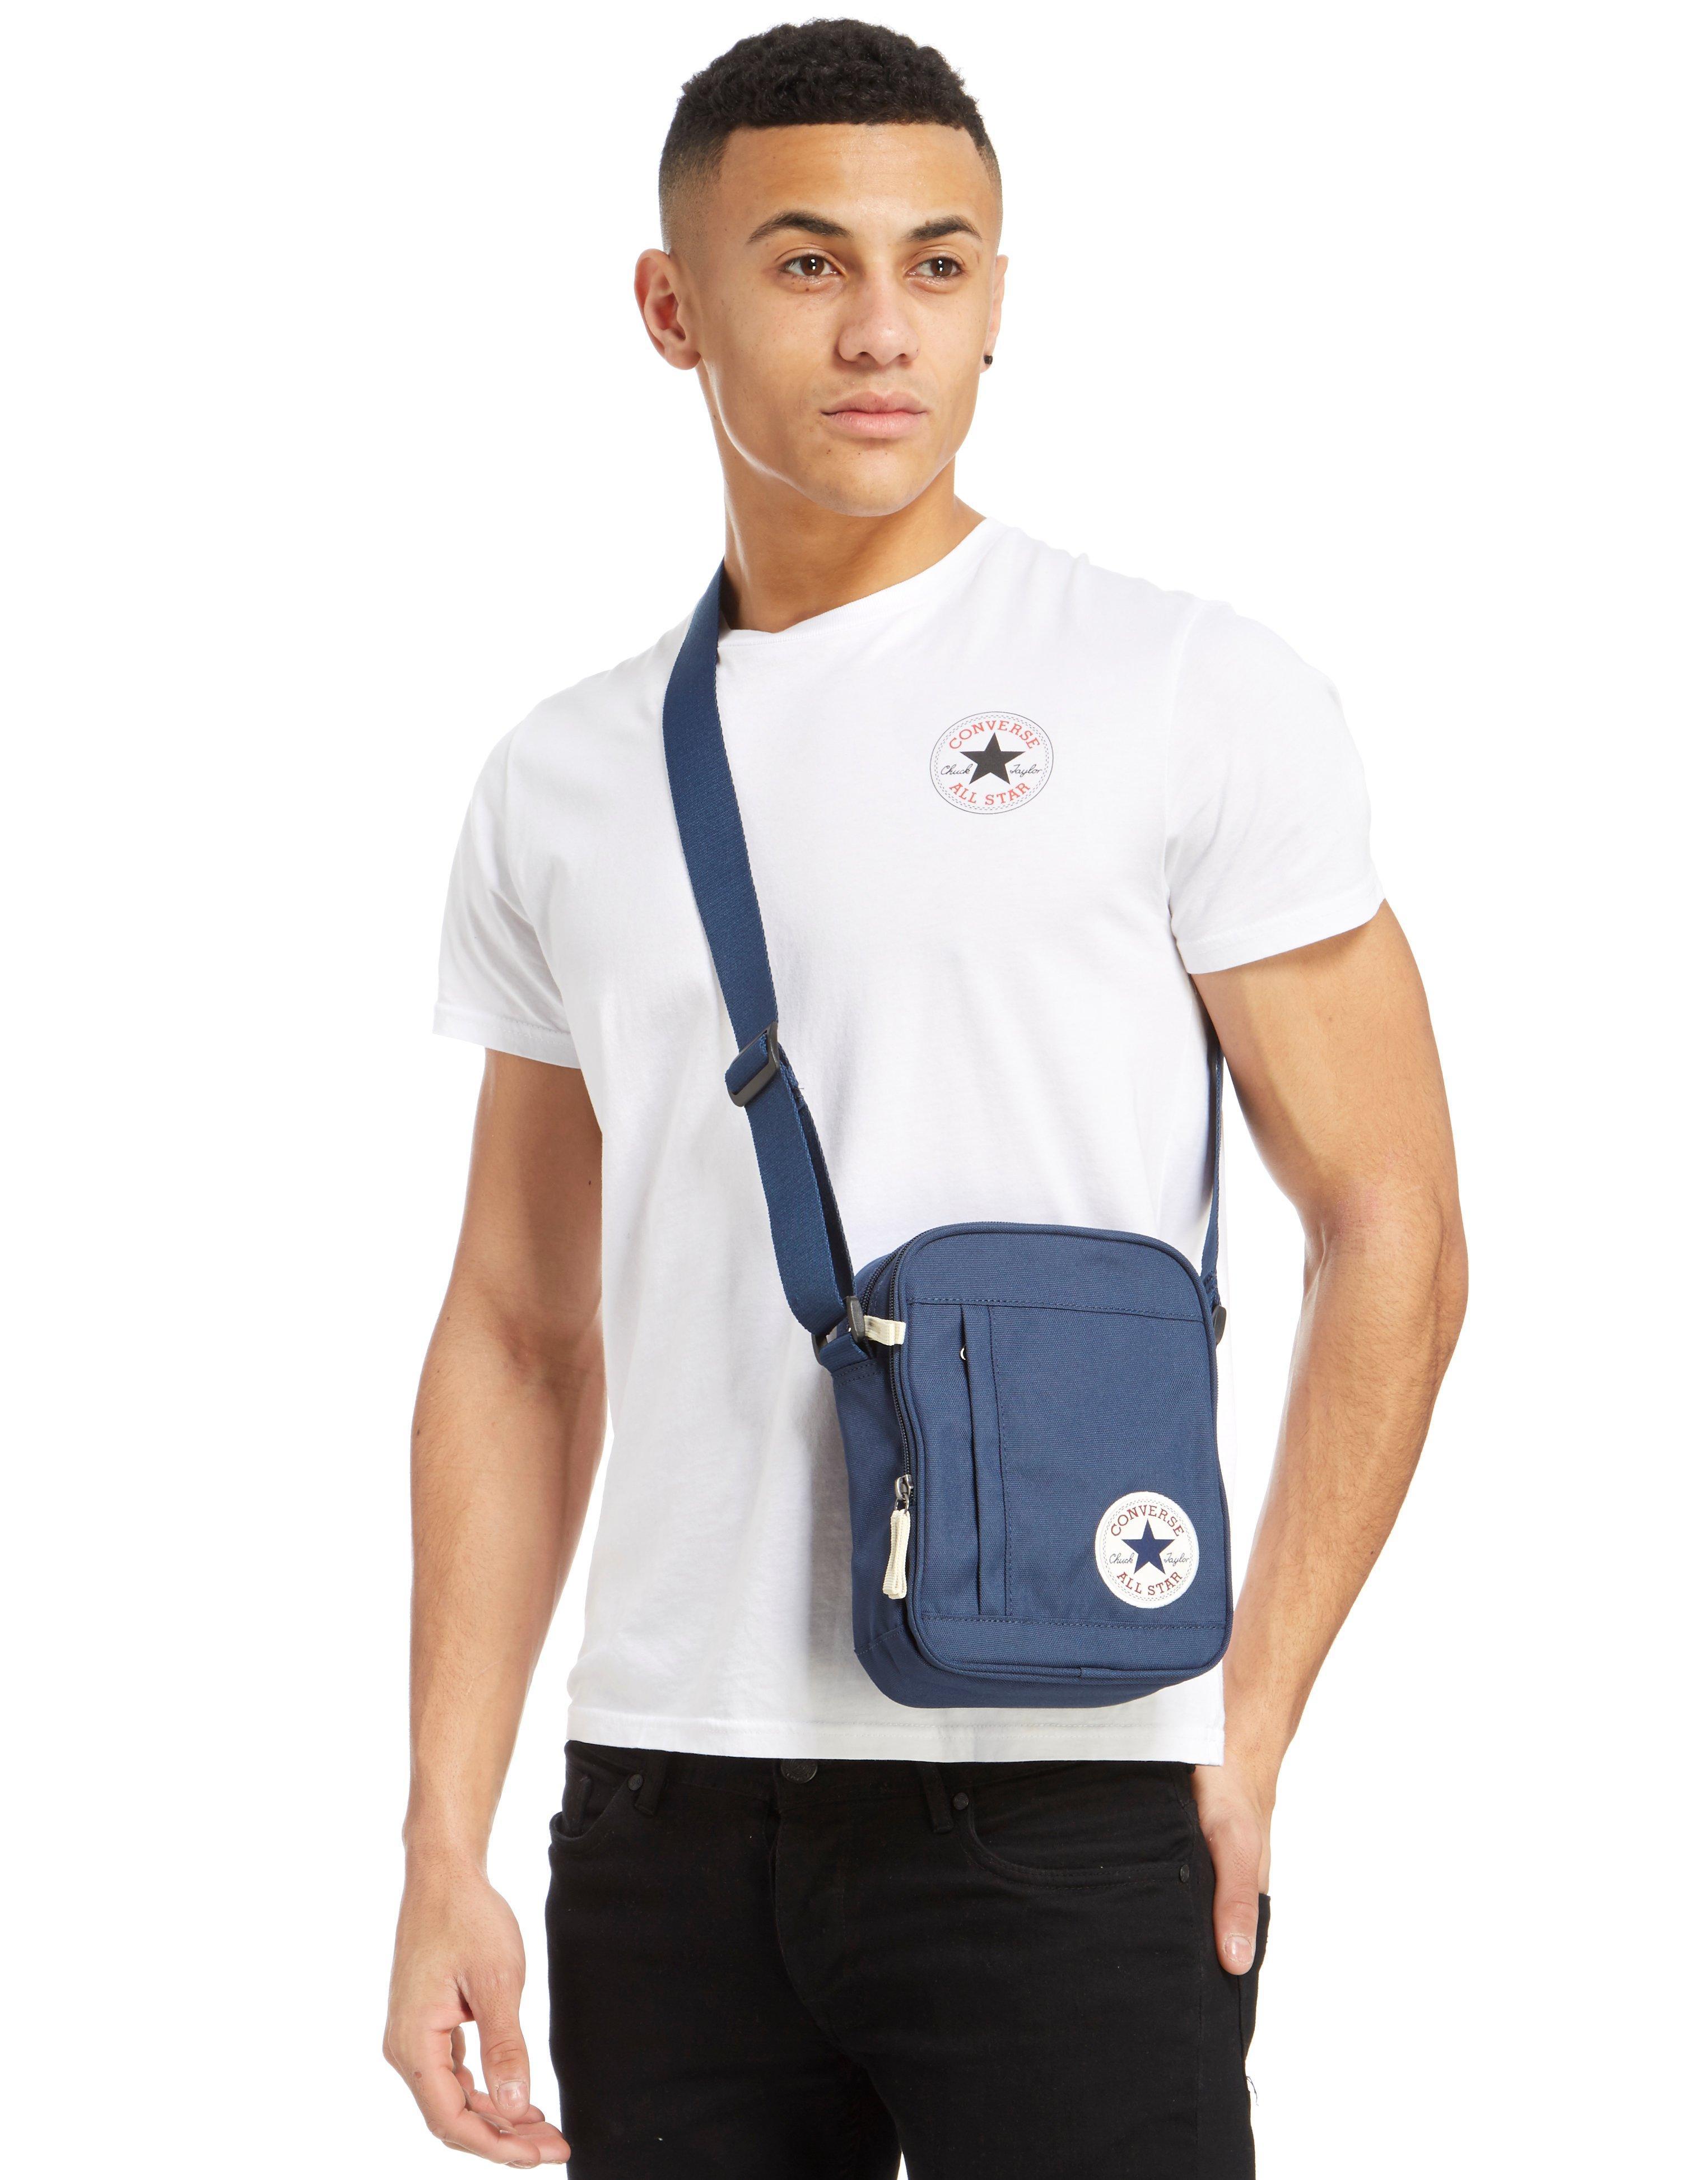 converse small items bag Online 